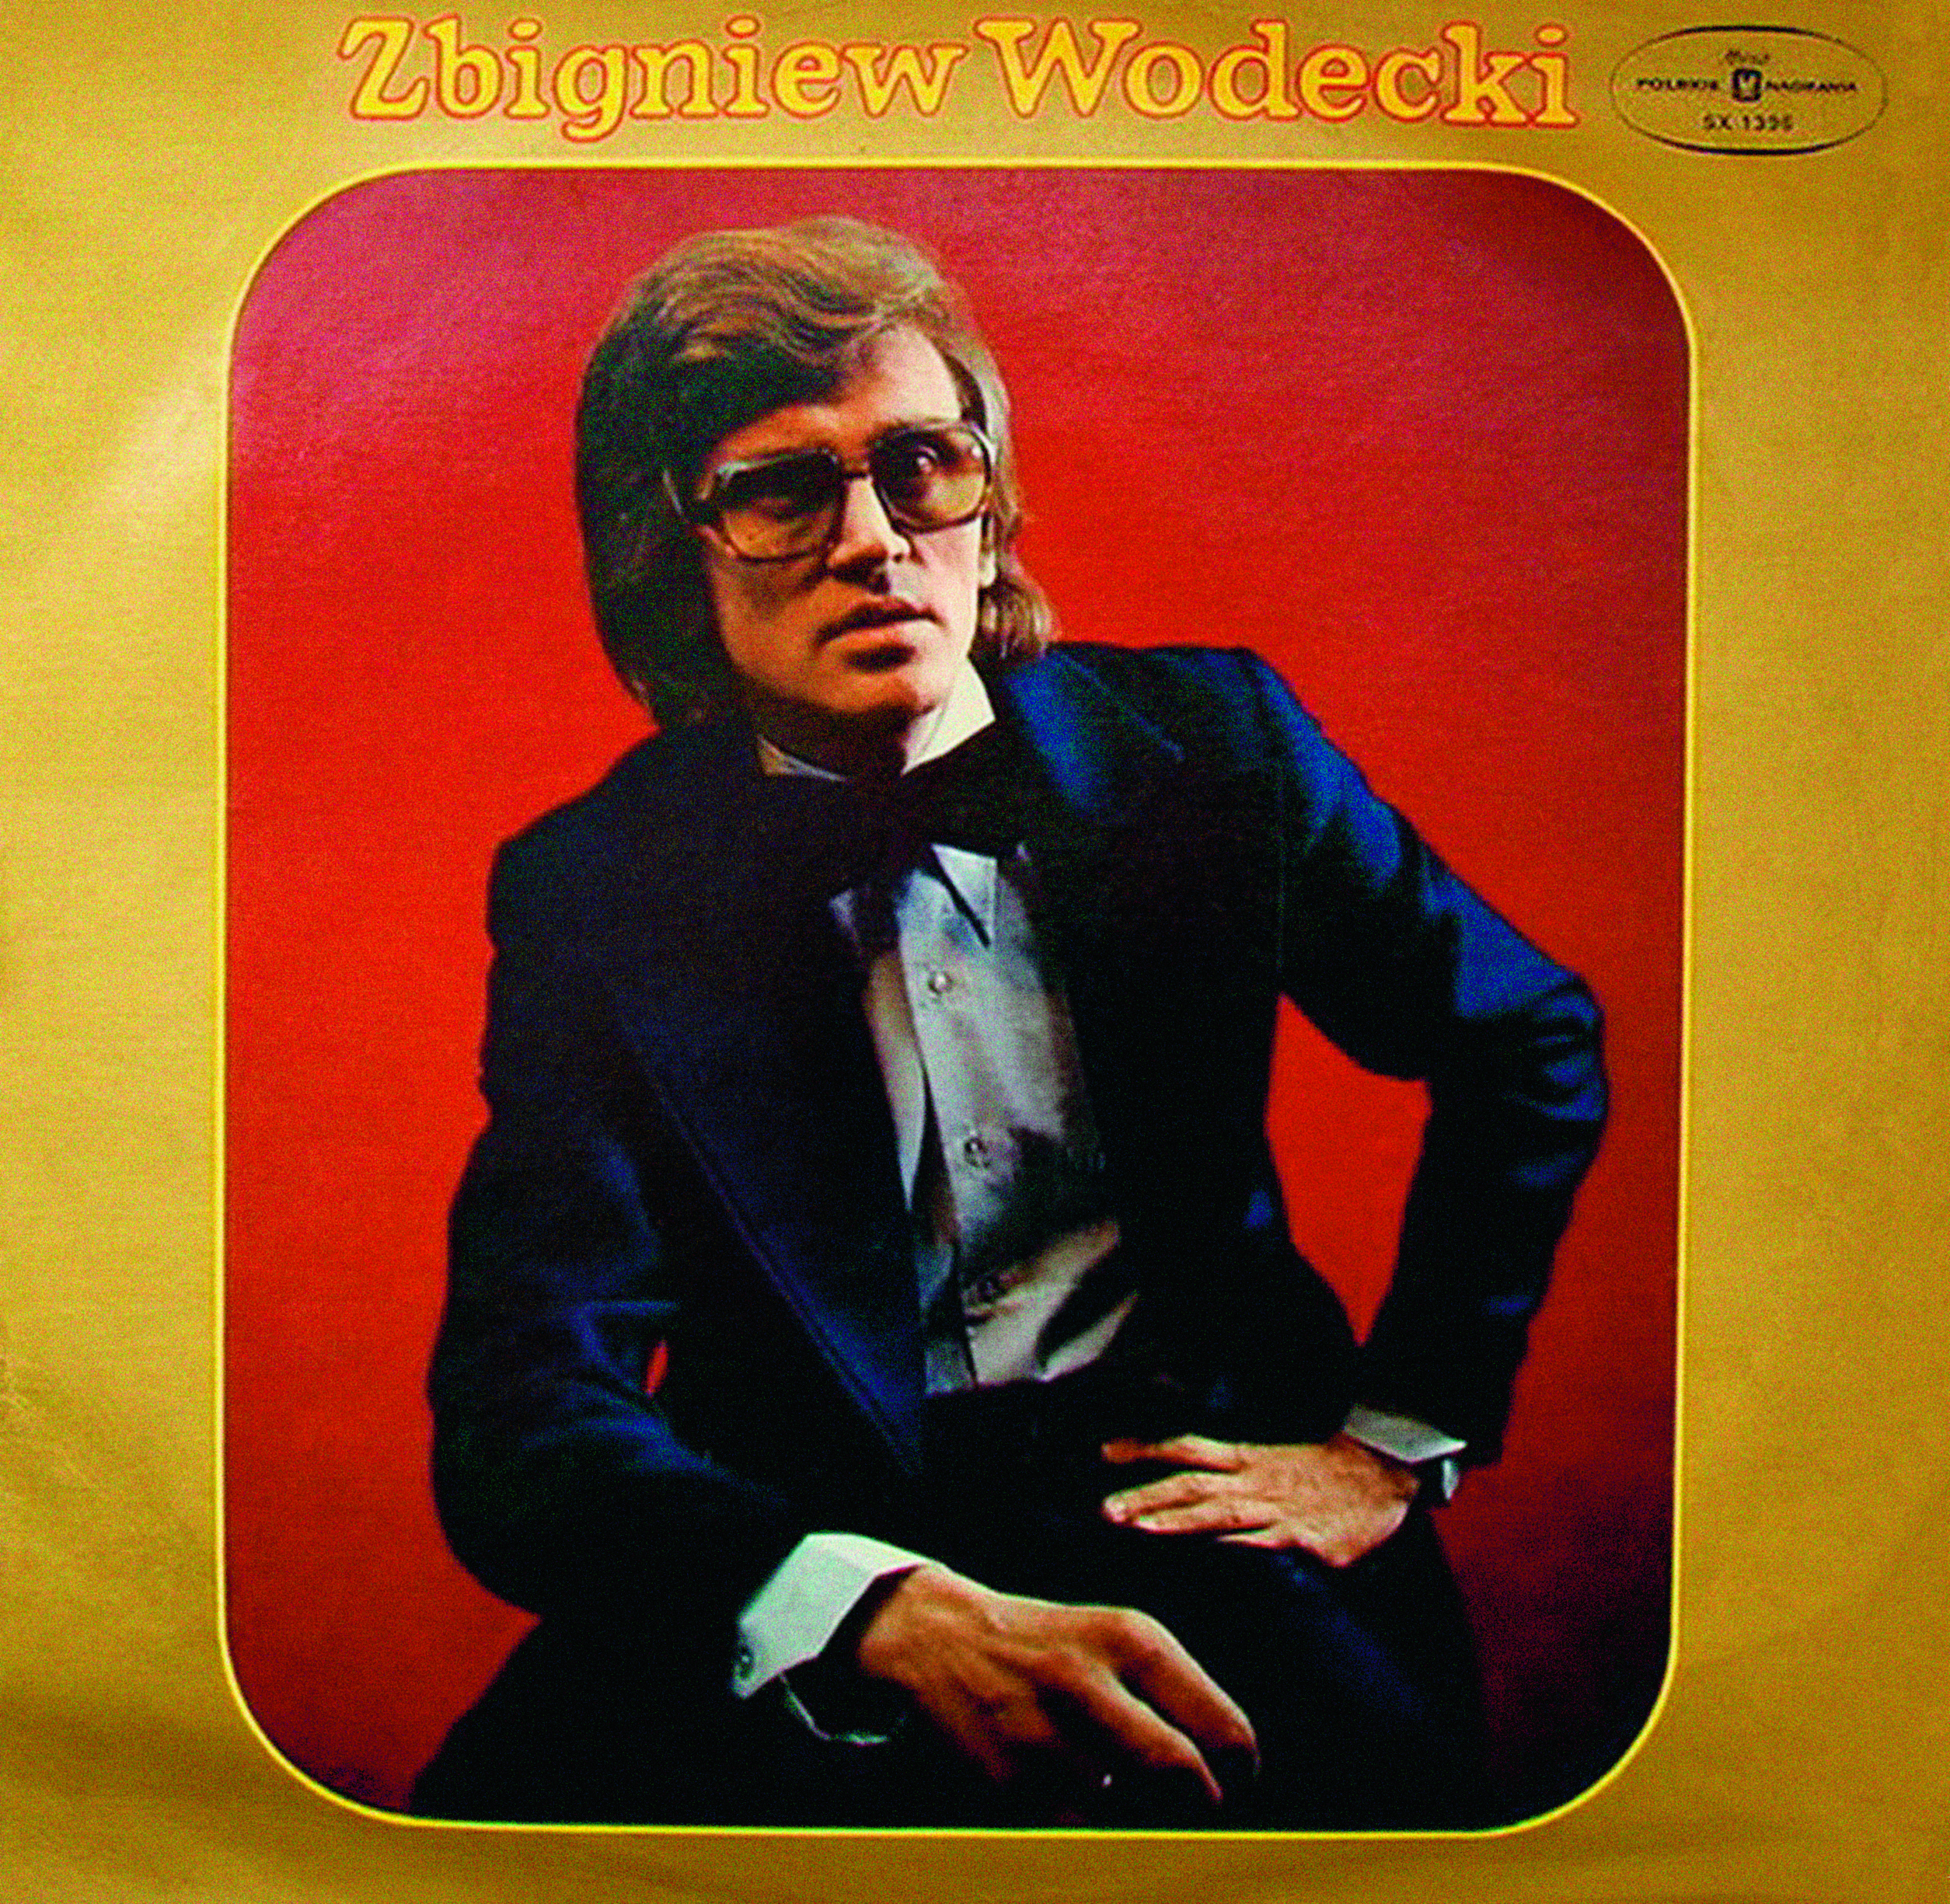 Zbigniew Wodecki: As he was. Silhouette – culture